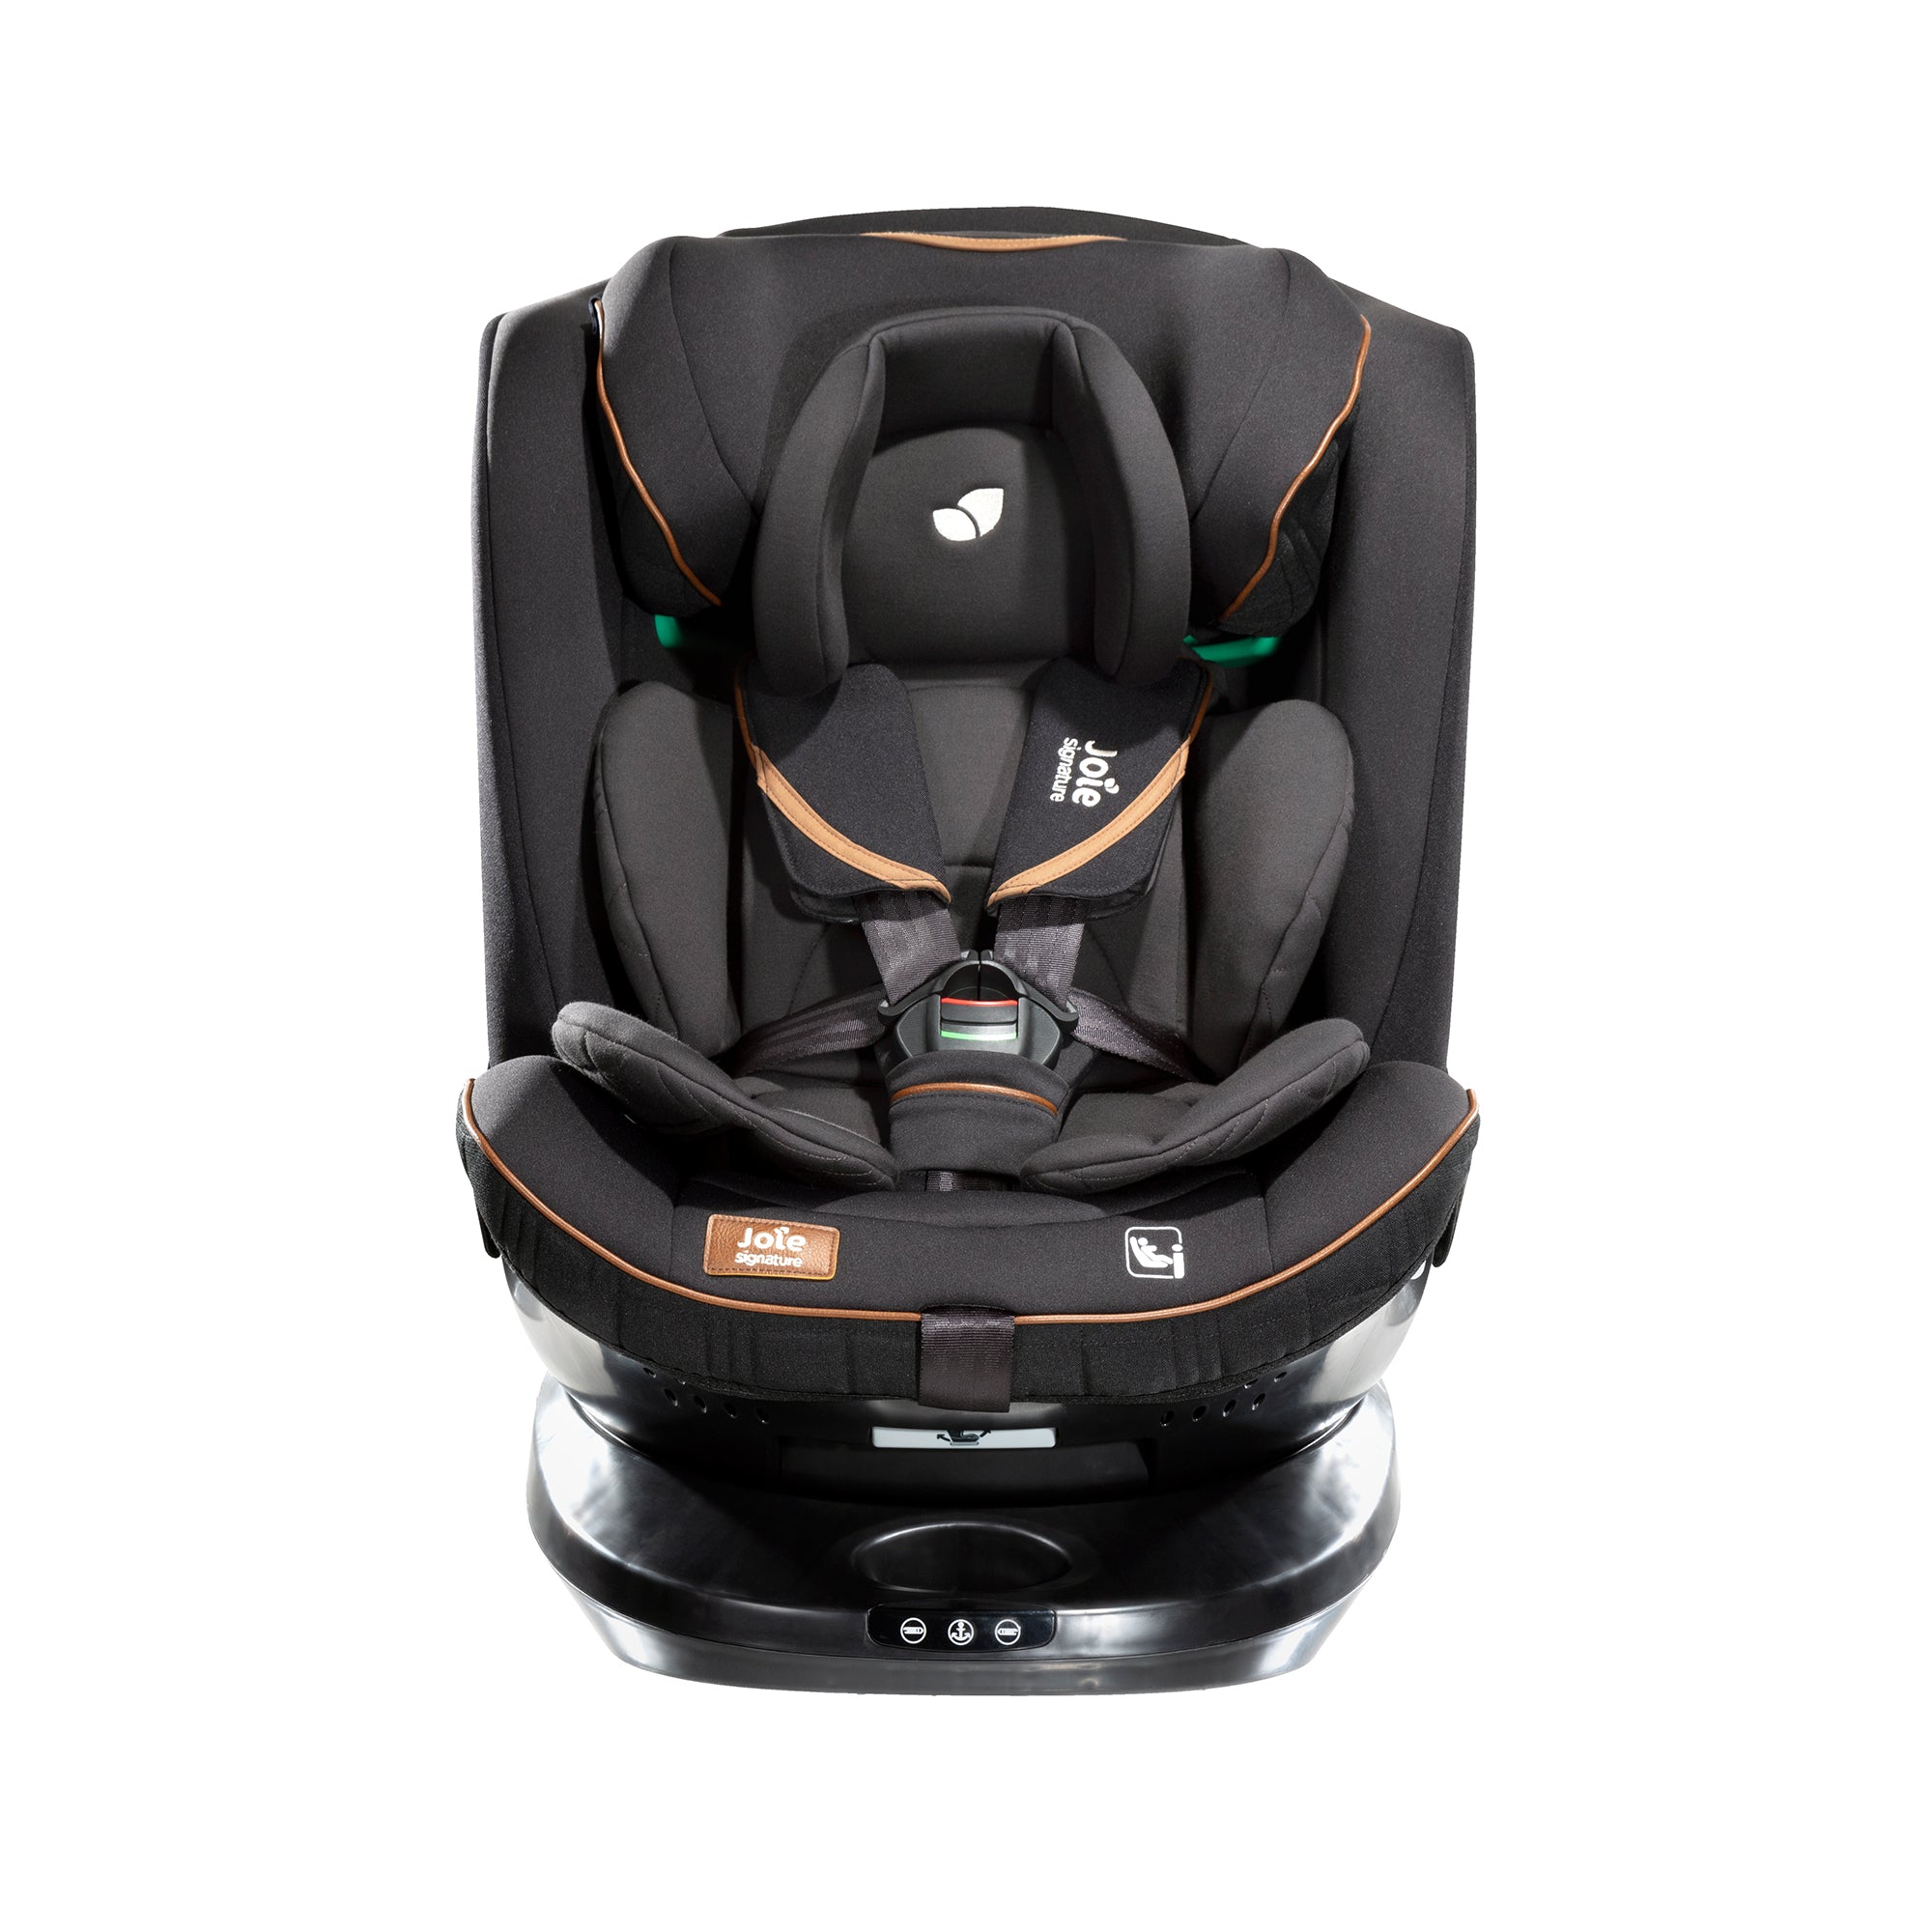 Joie Signature Car seat i-Spin Grow Eclipse Birth to 26 kg